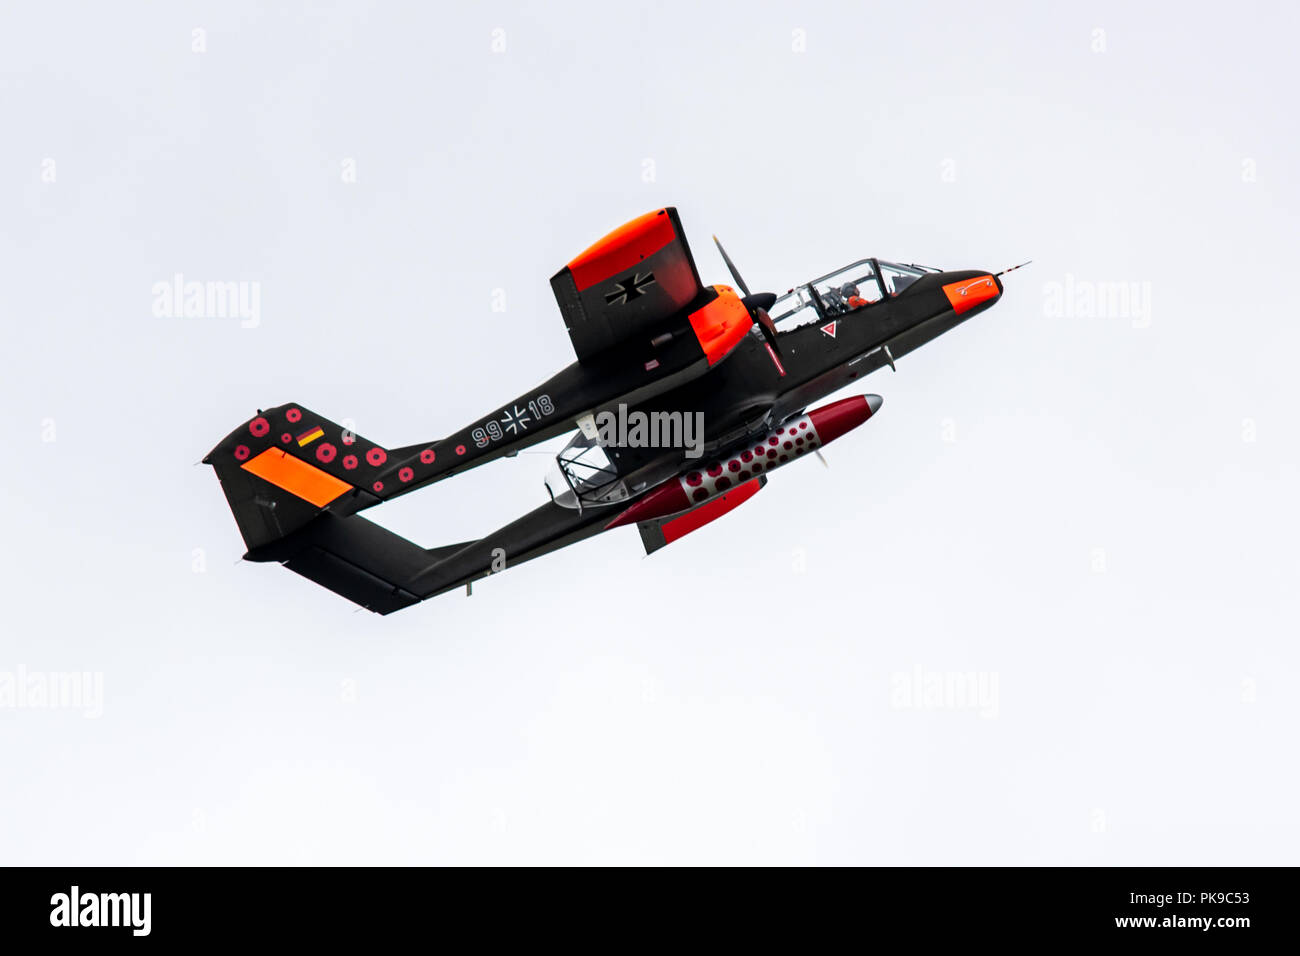 A German Luftwaffe North American Rockwell OV-10 Bronco, twin turboprop, with its commemorative poppy decoration. Stock Photo